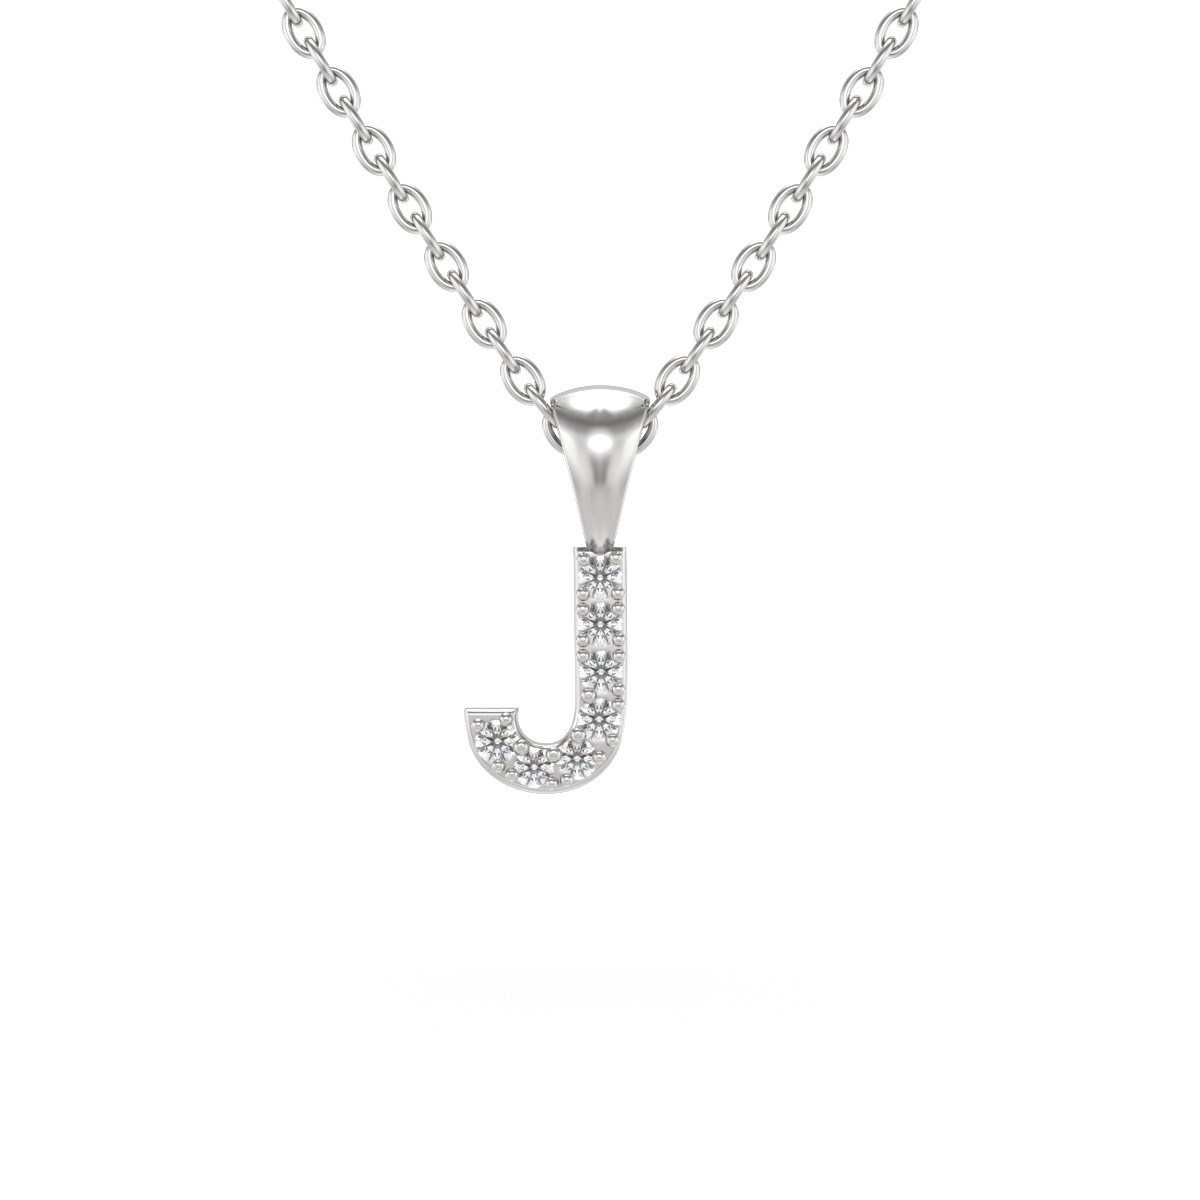 Collier Pendentif ADEN Lettre J Or 750 Blanc Diamant Chaine Or 750 incluse 0.72grs